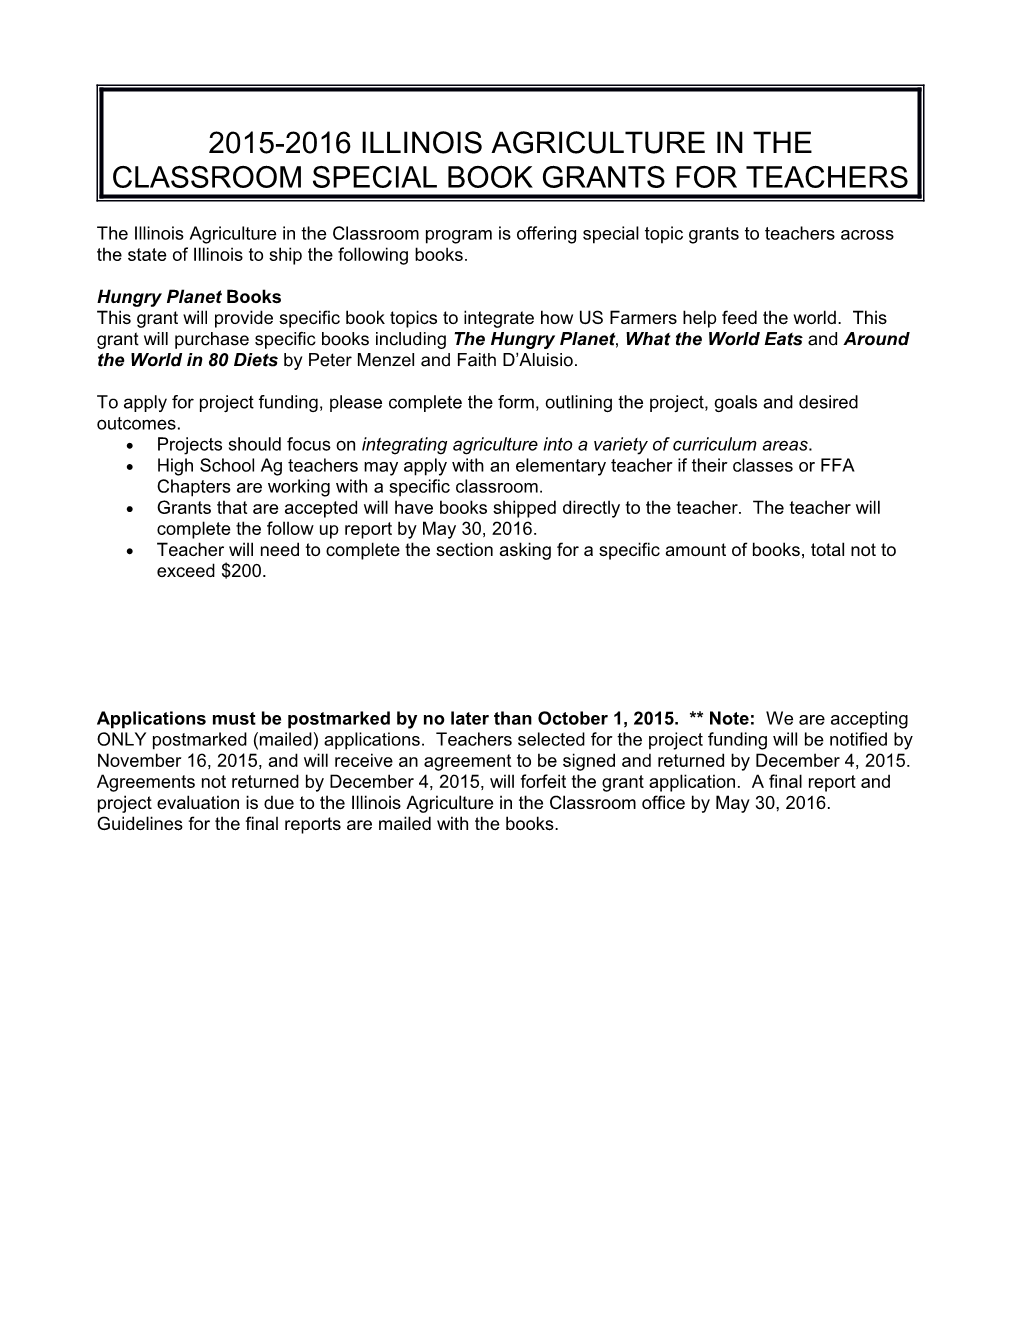 2015-2016Illinois Agriculture in the Classroom Special Book Grants for Teachers